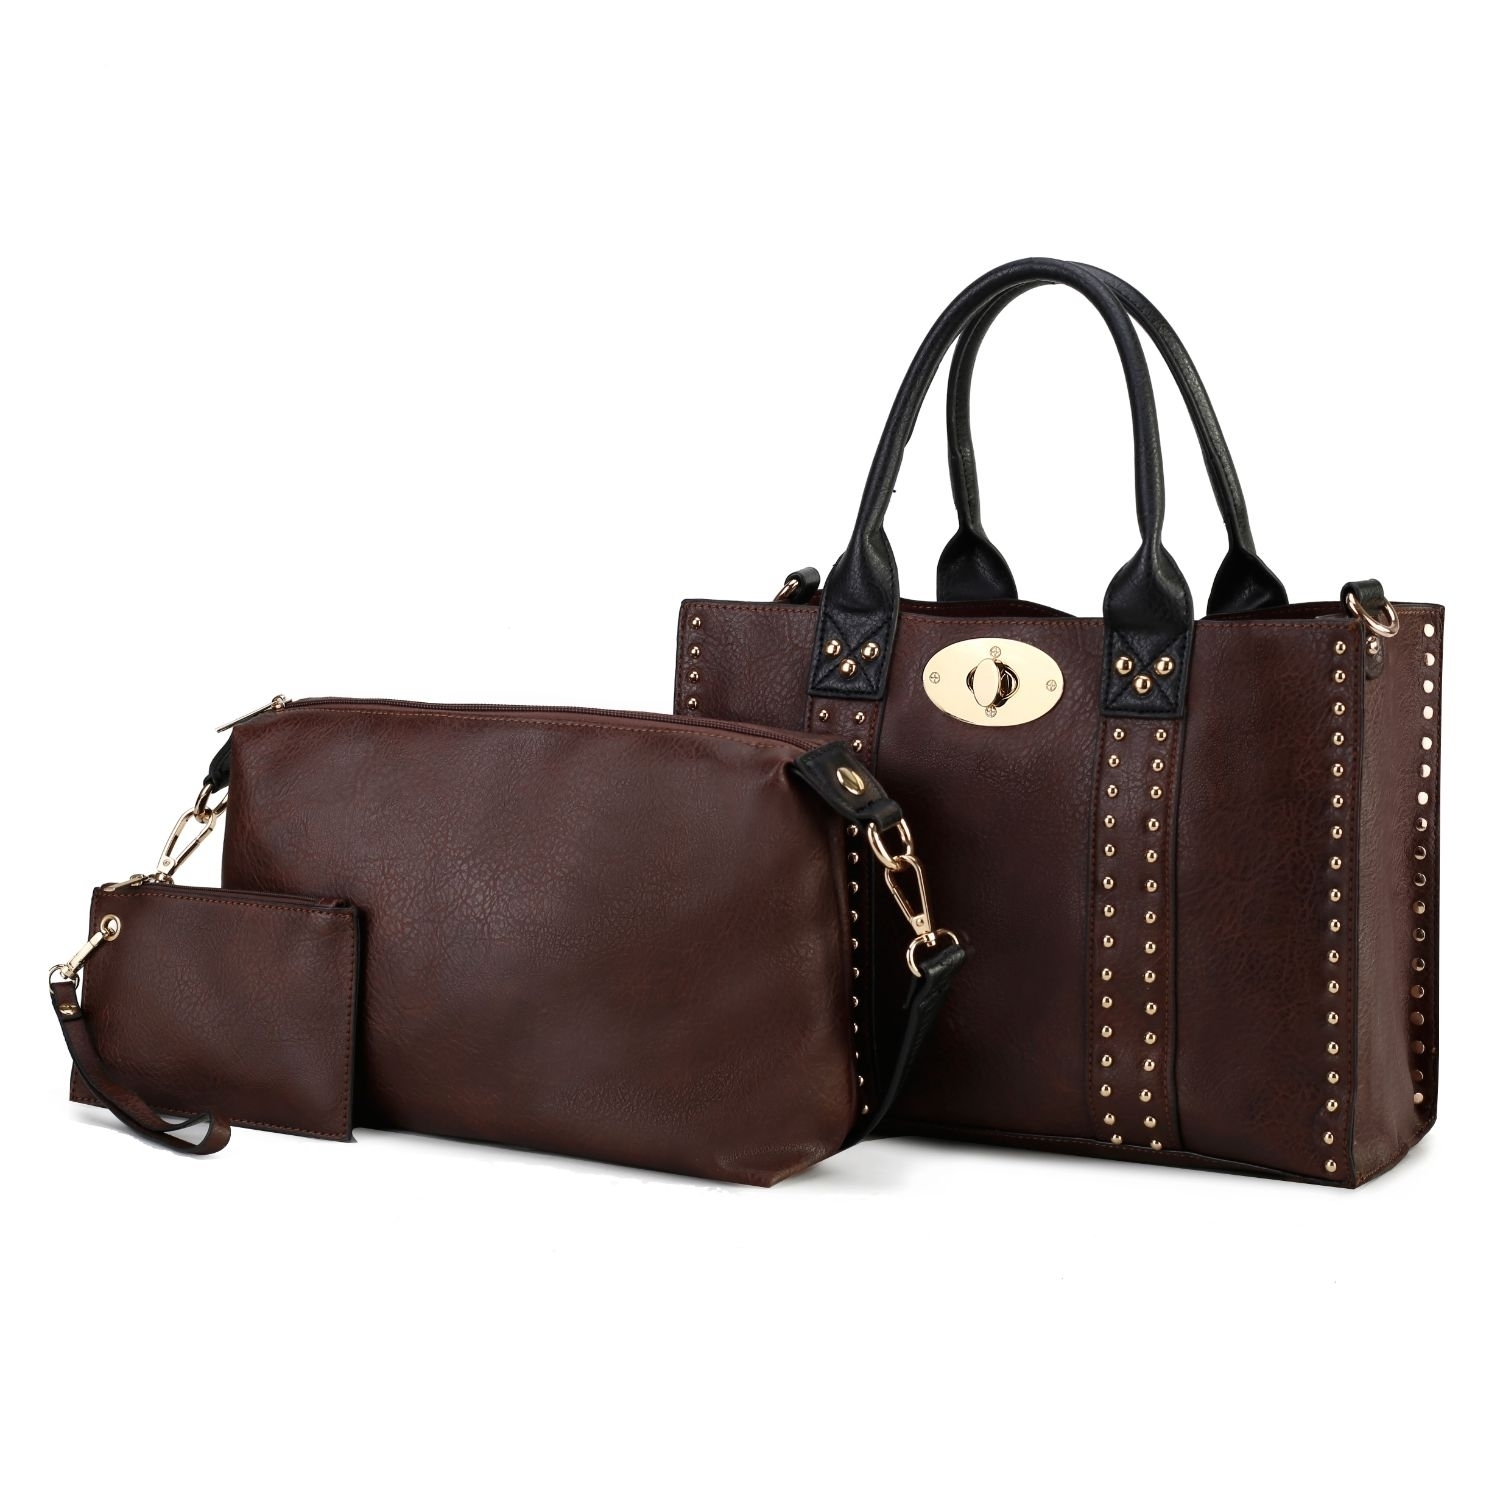 MKF Collection Elissa 3 Pc Set Satchel Handbag With Pouch & Coin Purse By Mia K. - Coffee-black